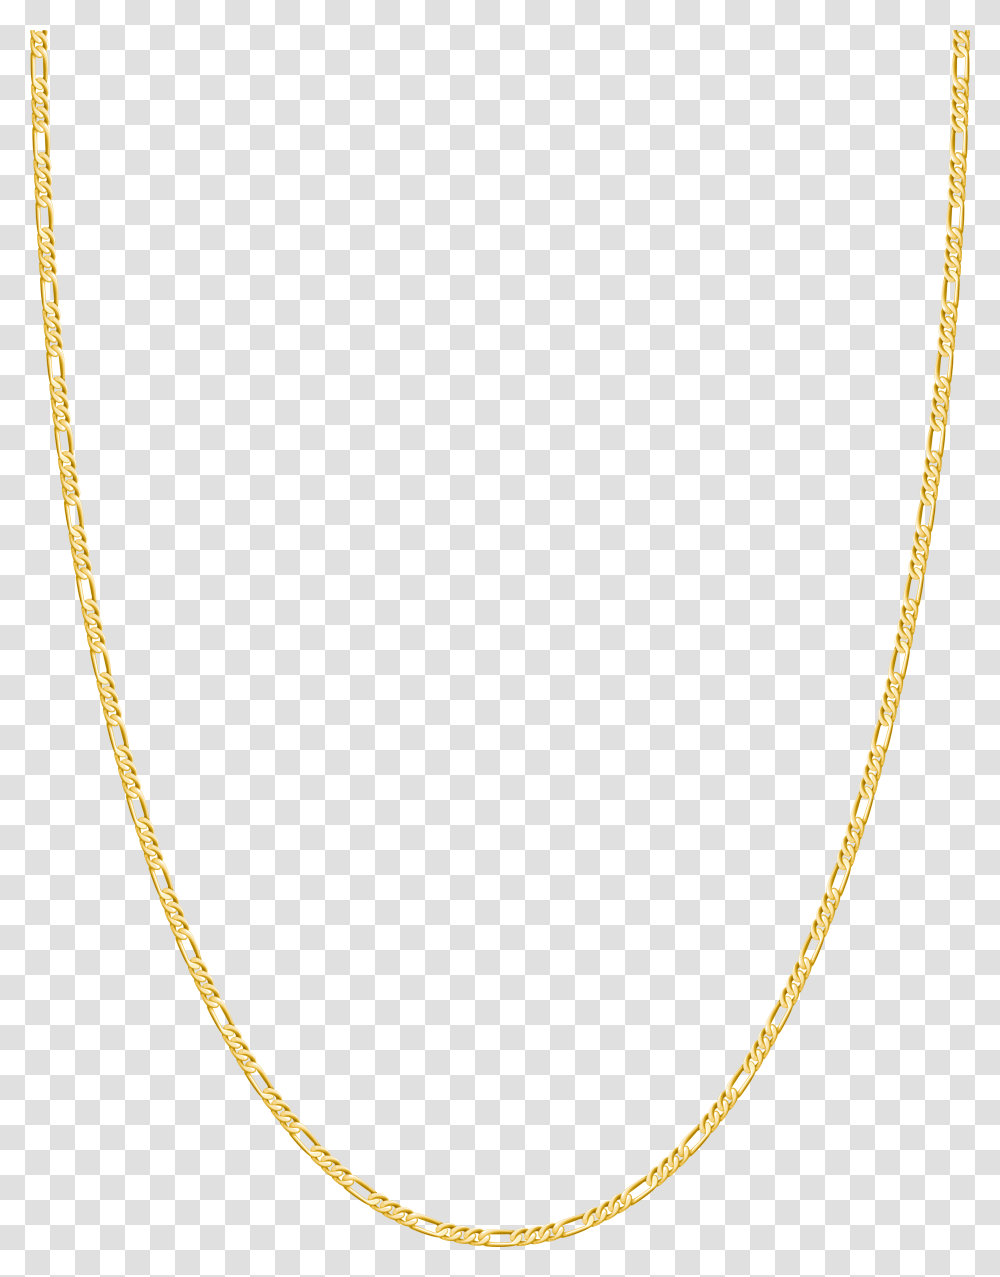 Yellow Product Angle Pattern, Chain, Necklace, Jewelry, Accessories Transparent Png